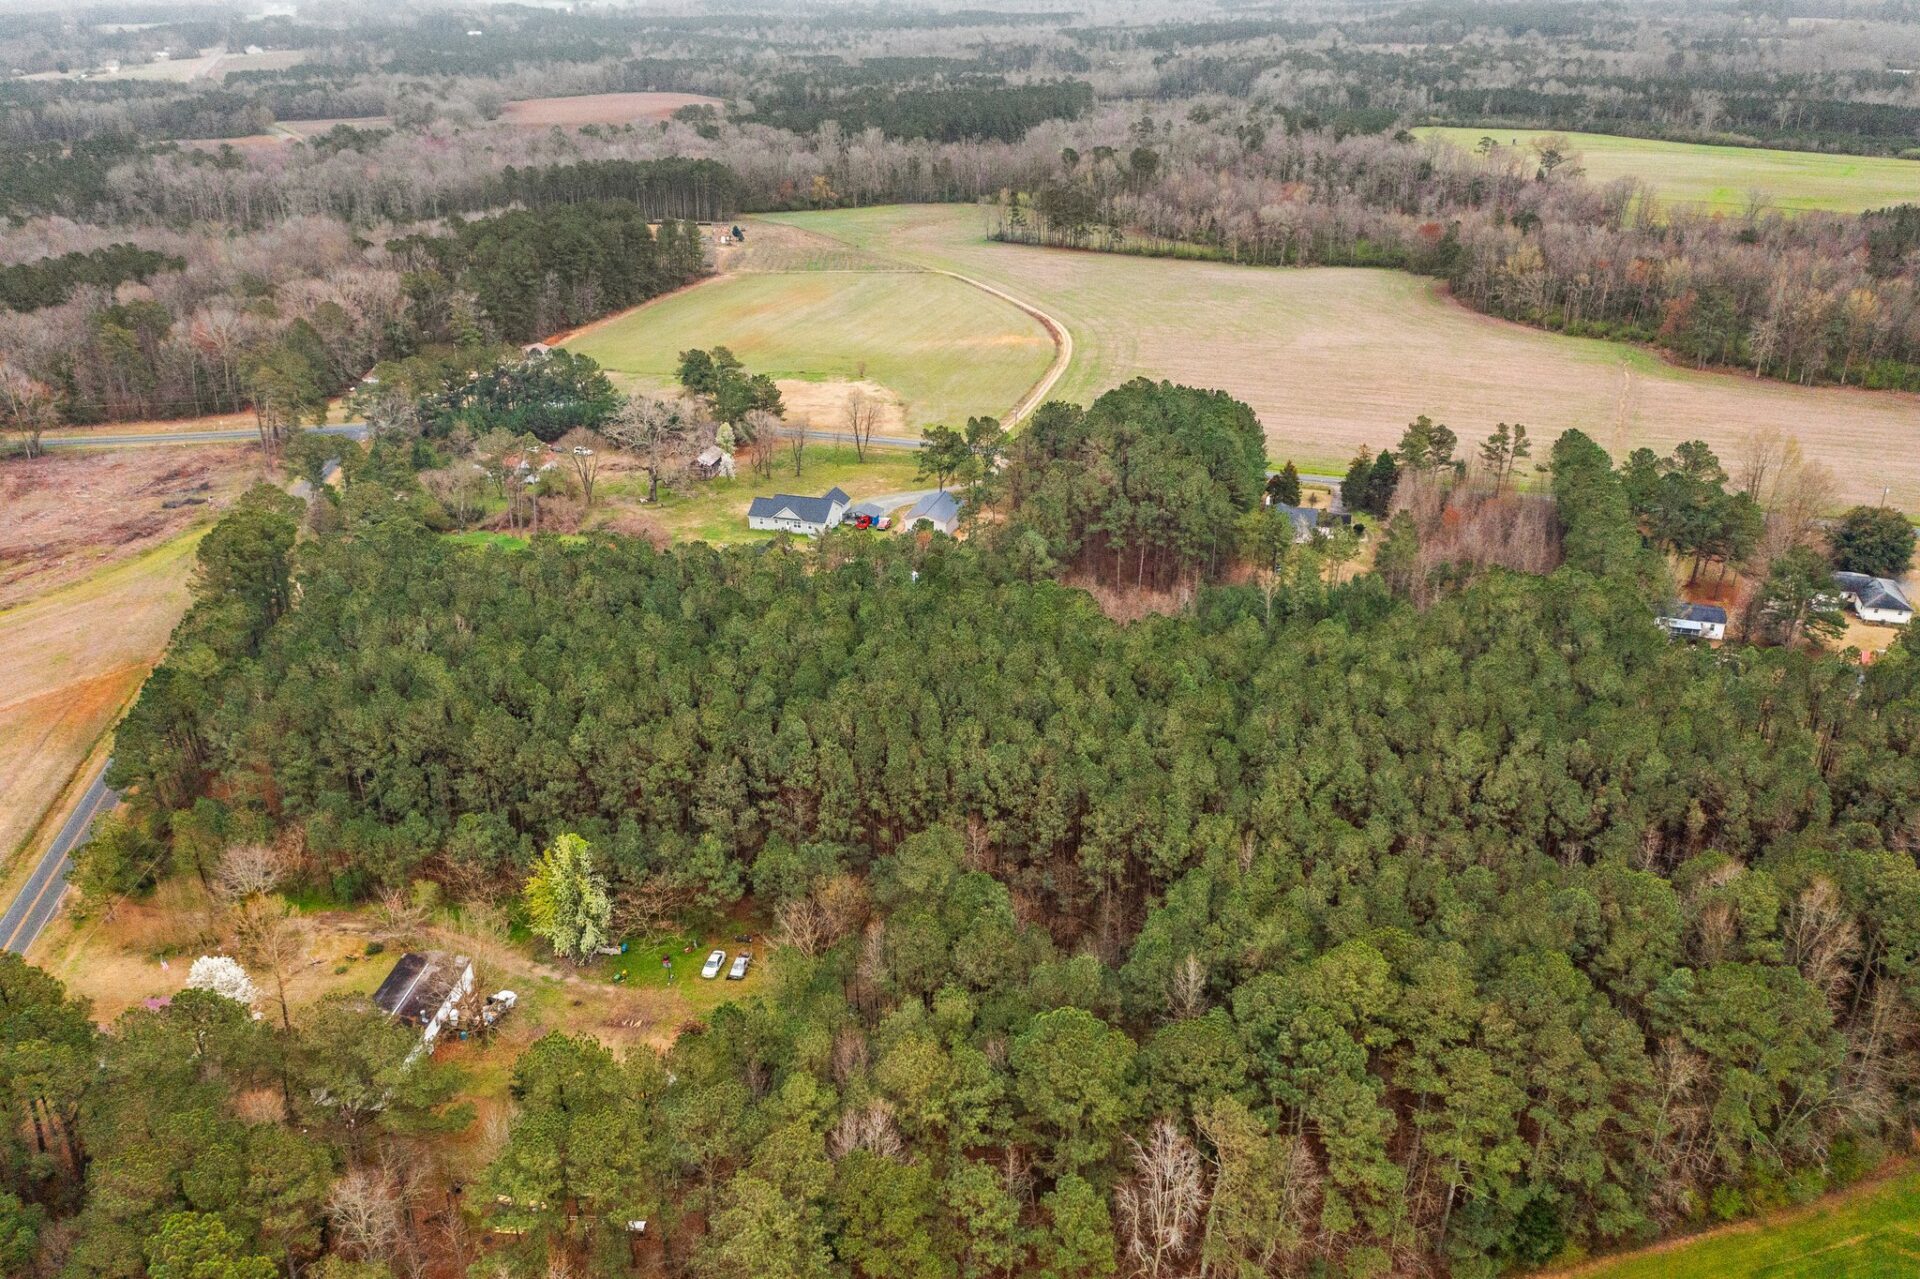 From Listing to Closing: Tom’s $24,708 Land Deal